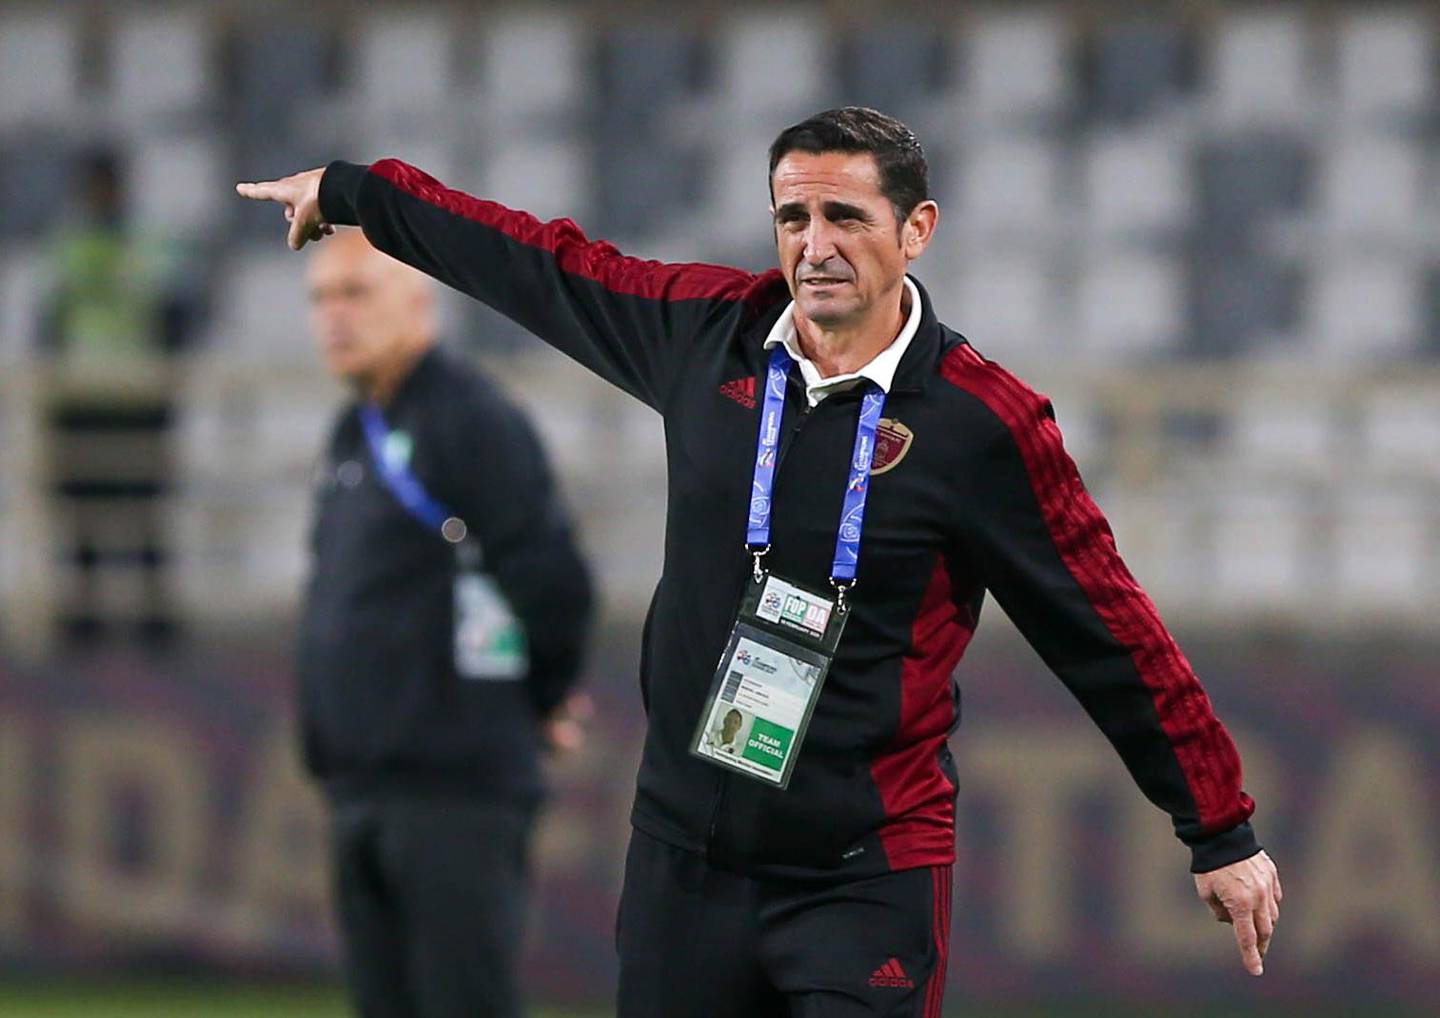 Wahda's manager Manuel Jimenez instructs his players during the AFC Champions League group A match between al-Wahda FC and al-Ahli FC at al-Nahyan Stadium in Abu Dhabi on February 10, 2020.  / AFP / -
